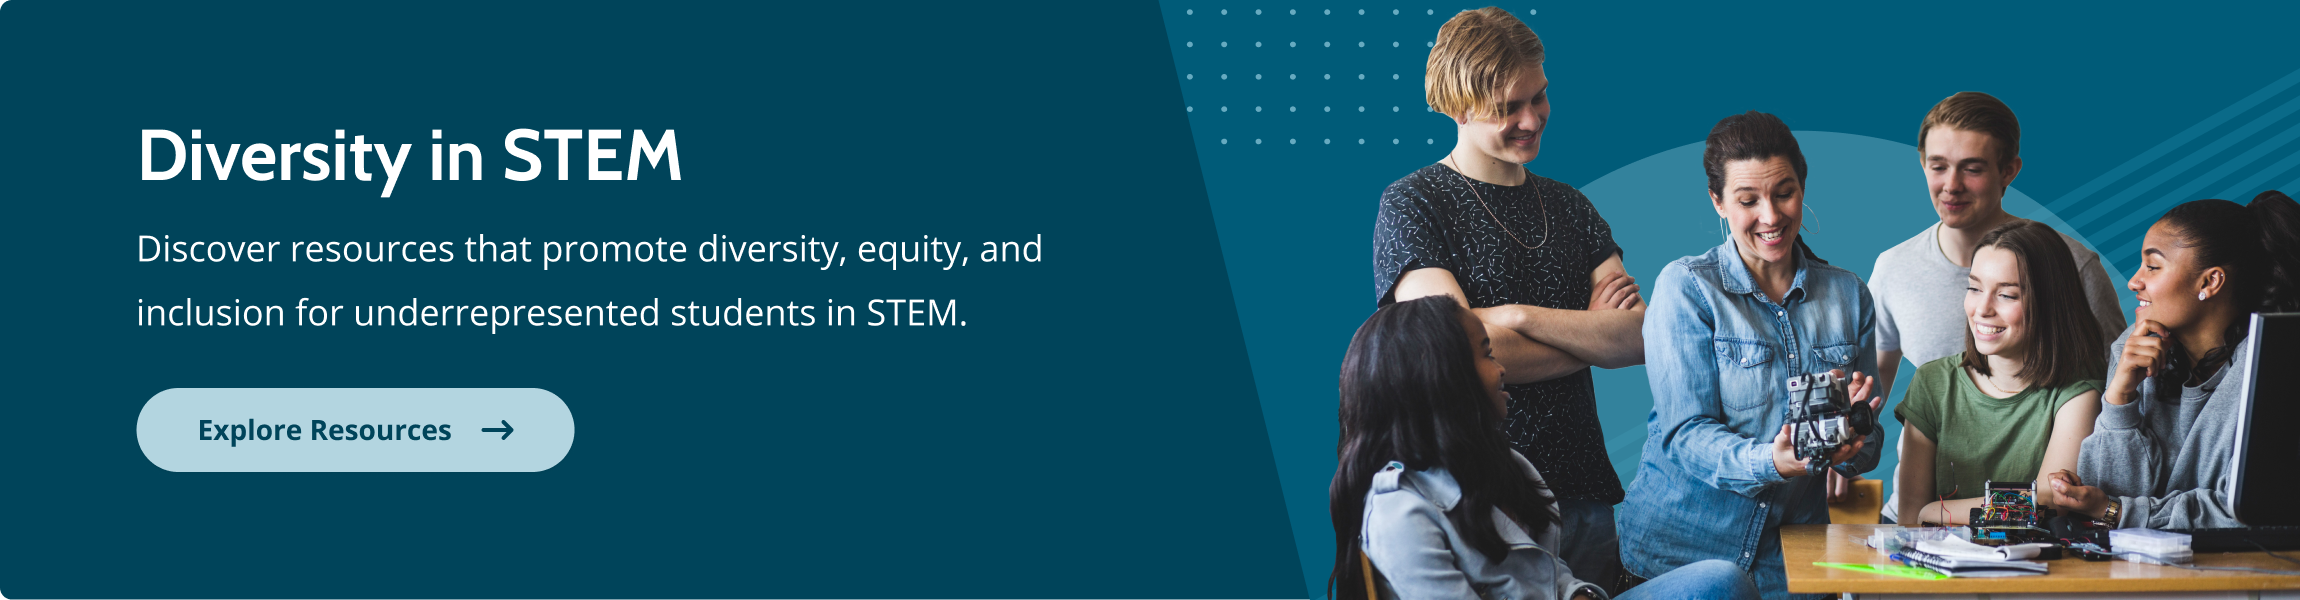 Diversity in STEM: Discover resources that promote diversity, equity, and inclusion for underrepresented students in STEM